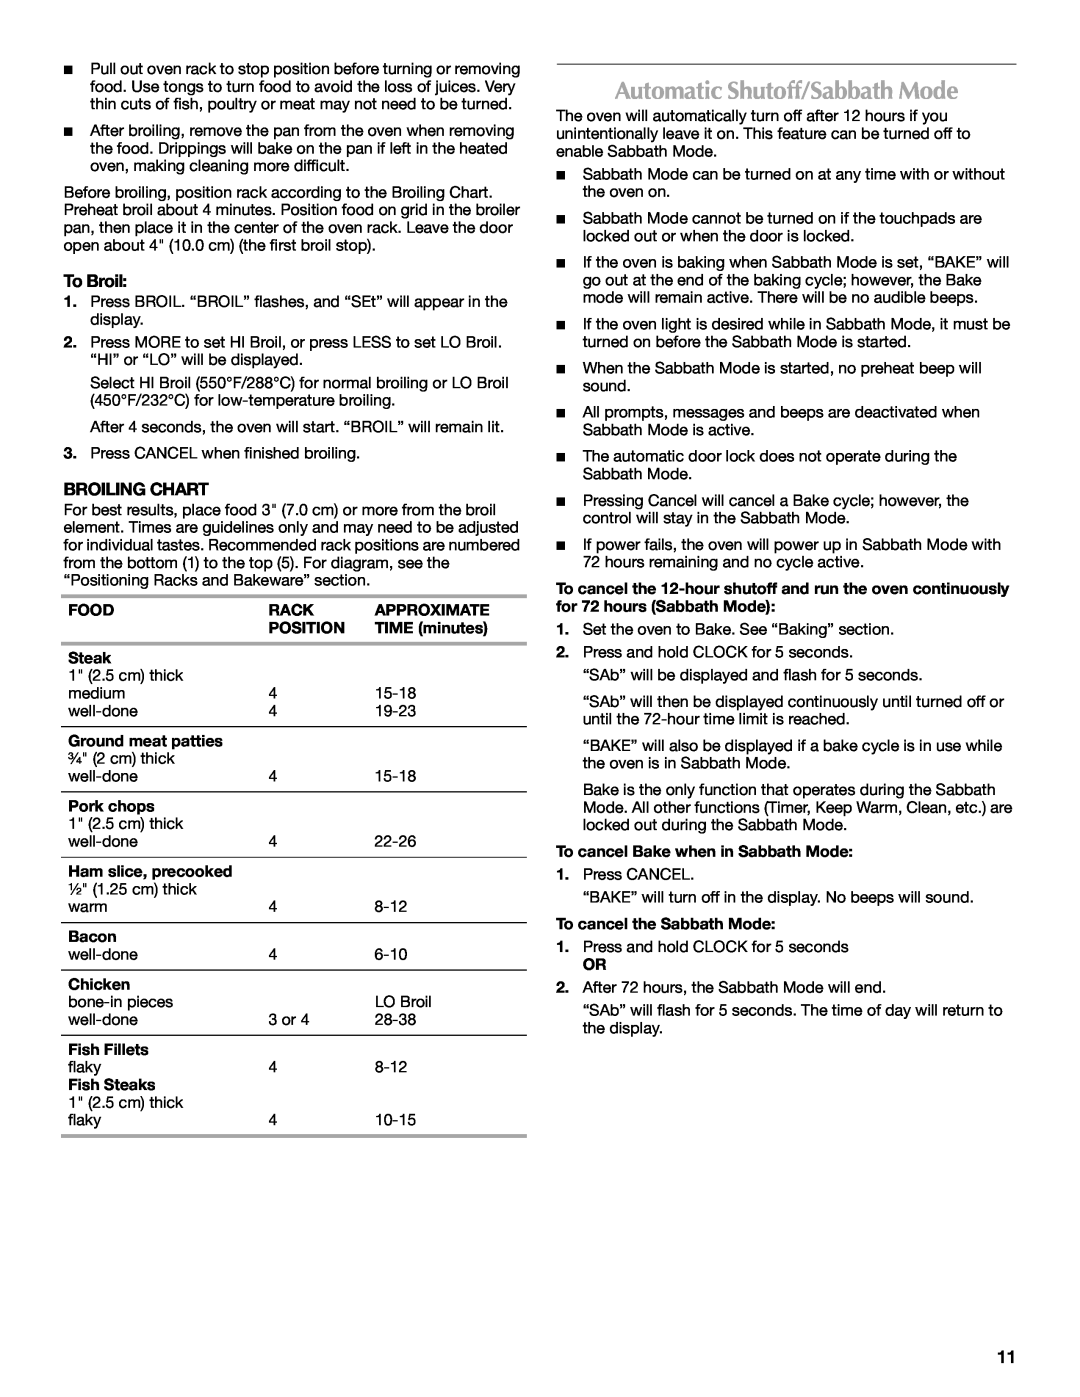 Maytag W10430917A manual Automatic Shutoff/Sabbath Mode, To Broil, Broiling Chart 